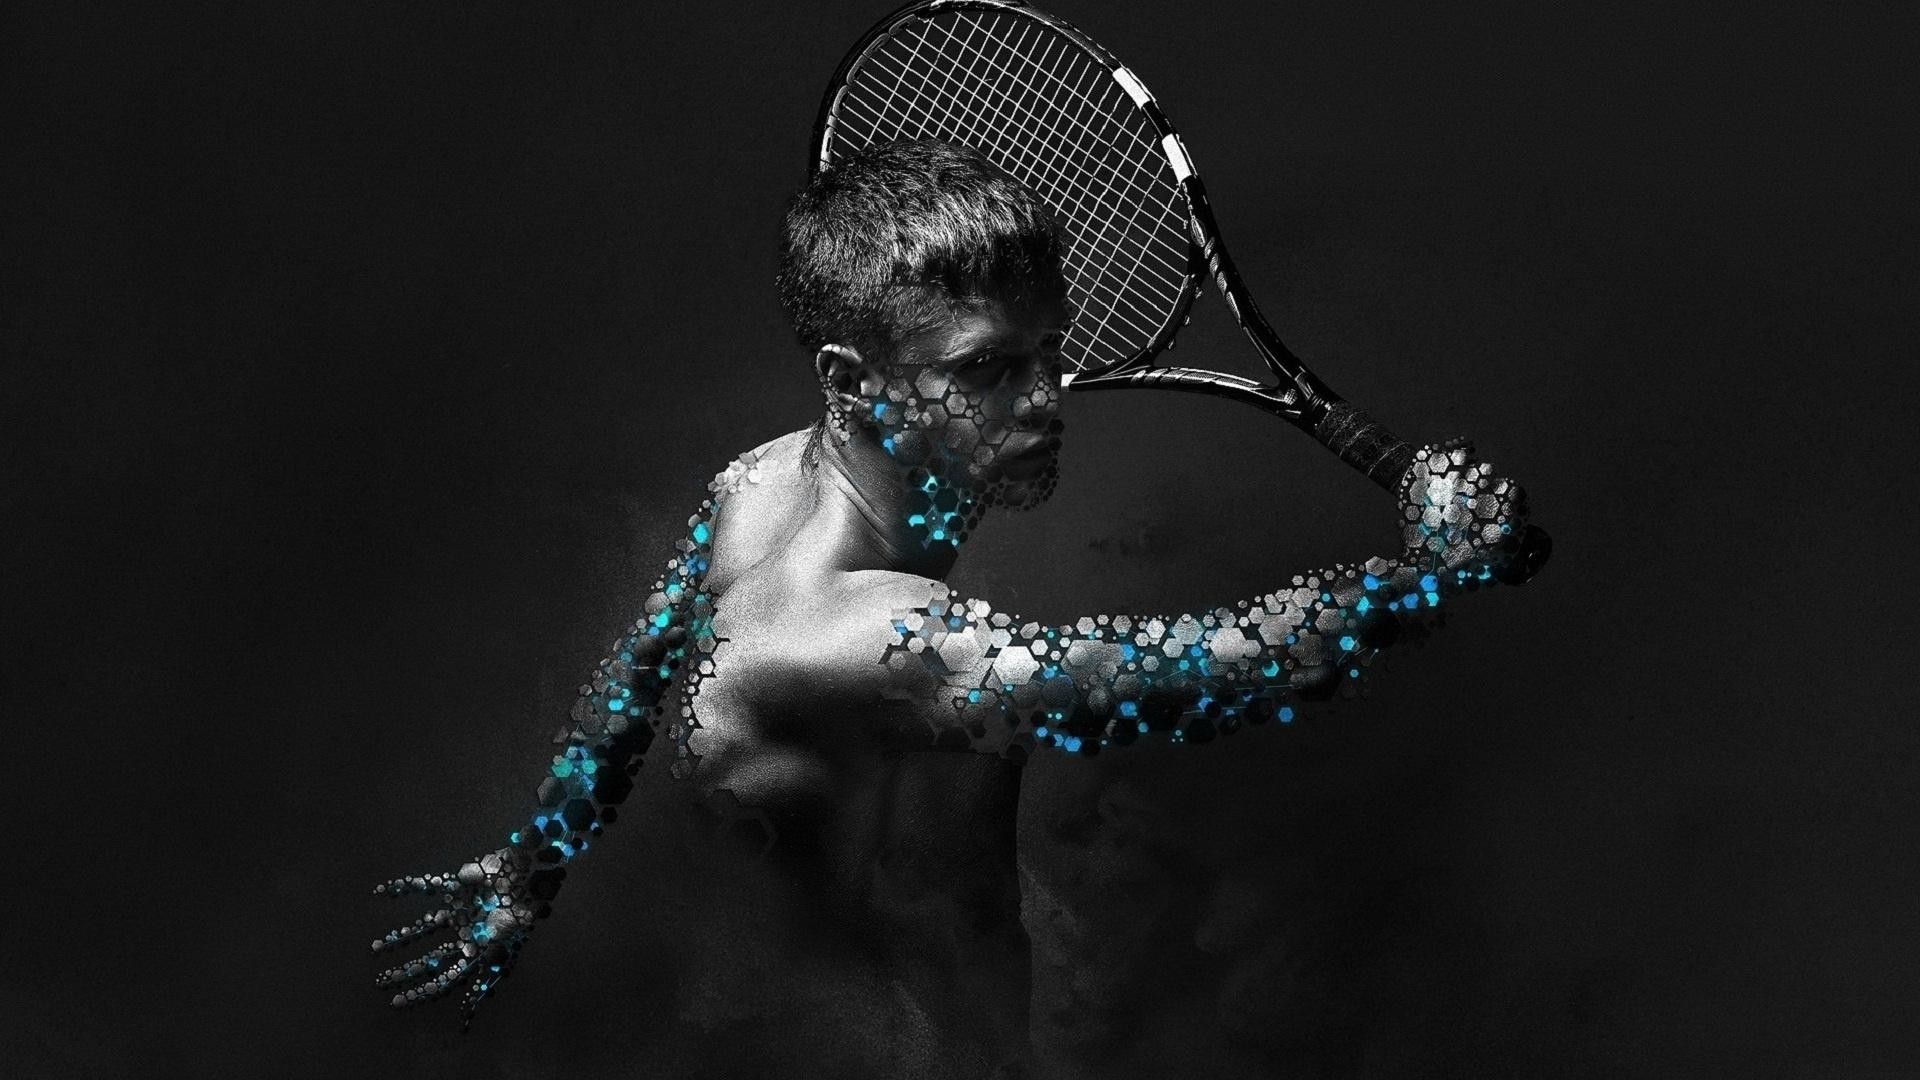 Tennis Wallpapers Hd Images